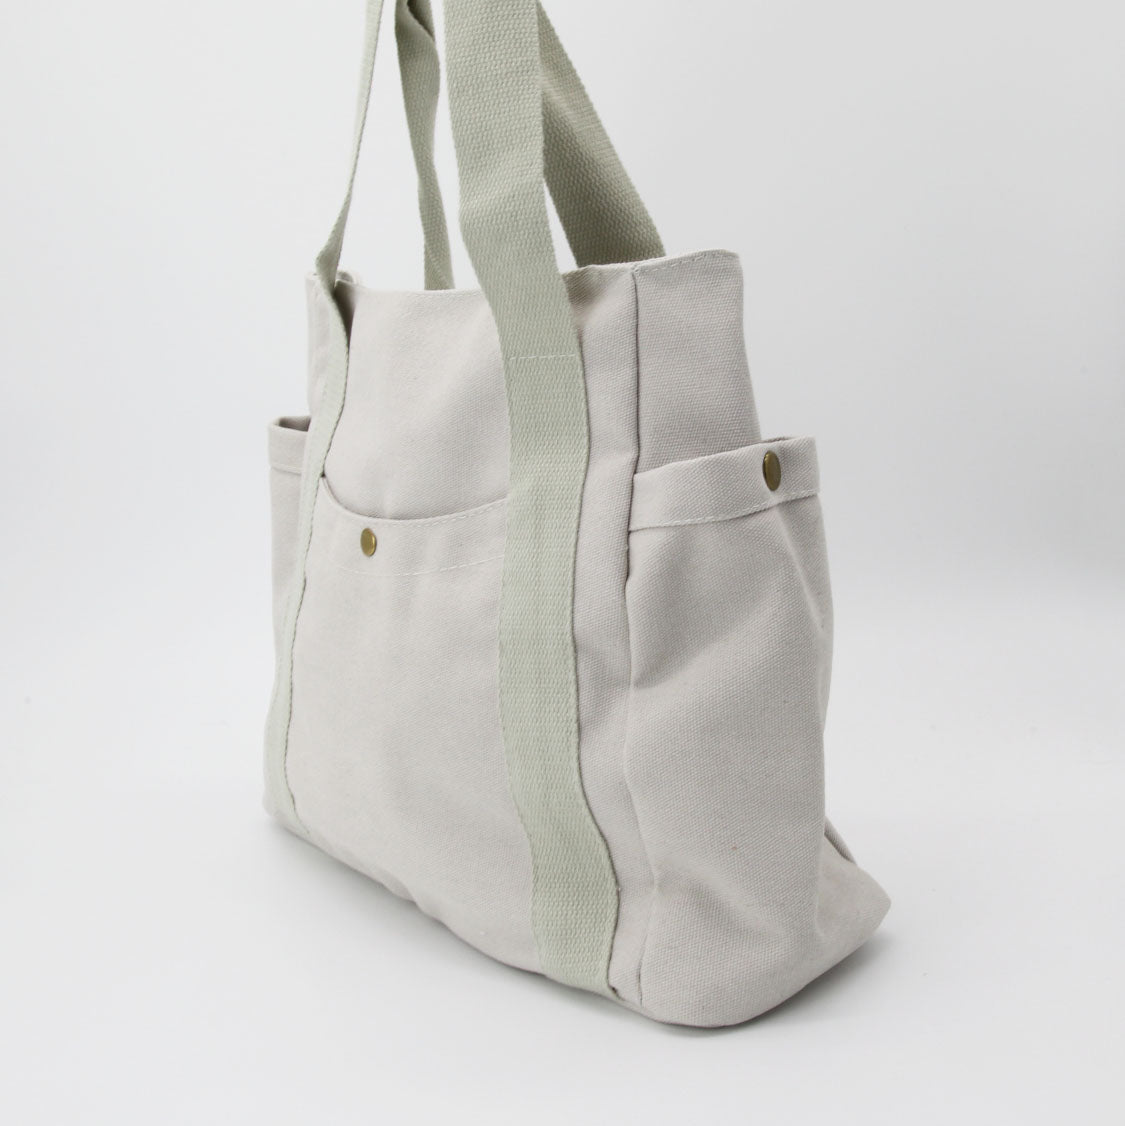 Fabric bag with pockets and zippers 